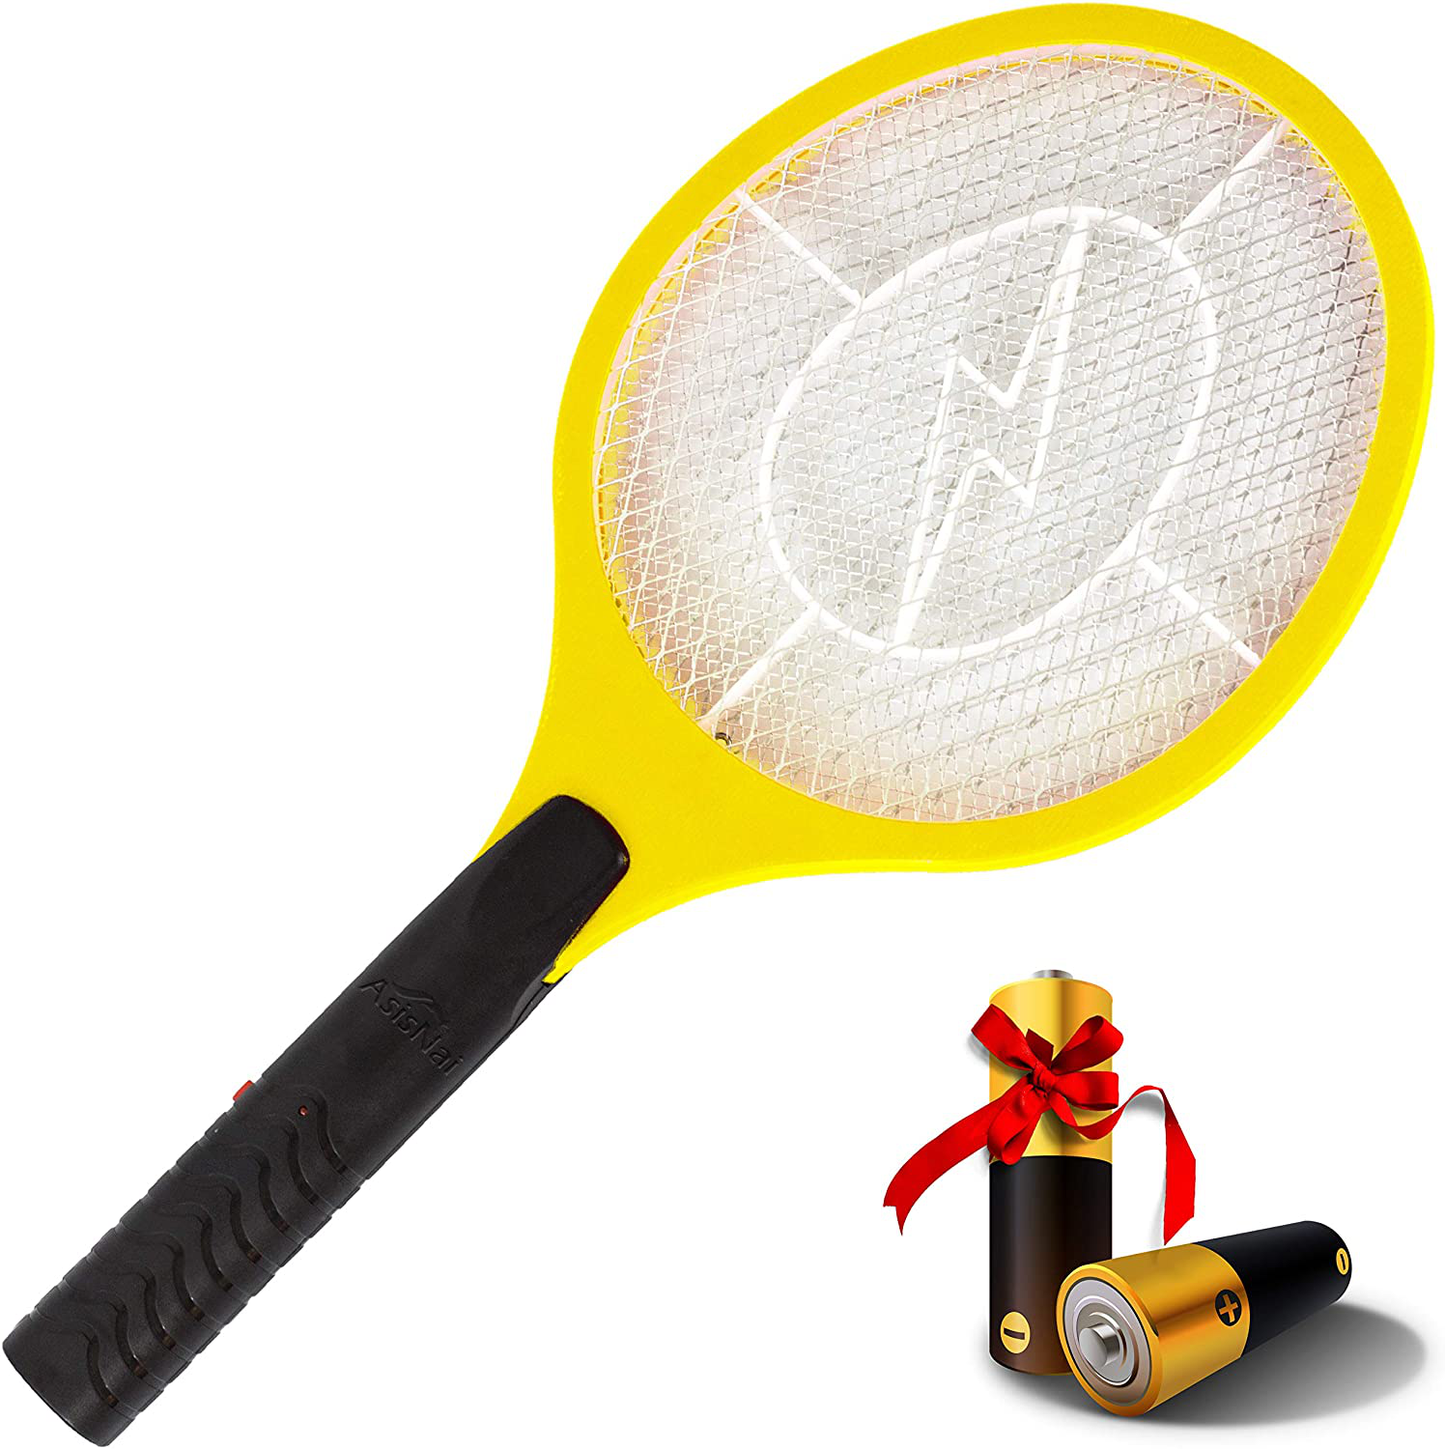 ASISNAI Bug Zapper Racket Electric Fly Swatter Mosquito Racket - 3000 Volt Wasp Killer Mosquito Zapper & Electric Bug Zapper. from Durable Materials Fly Killer Indoor & Outdoors Electric Fly Zapper